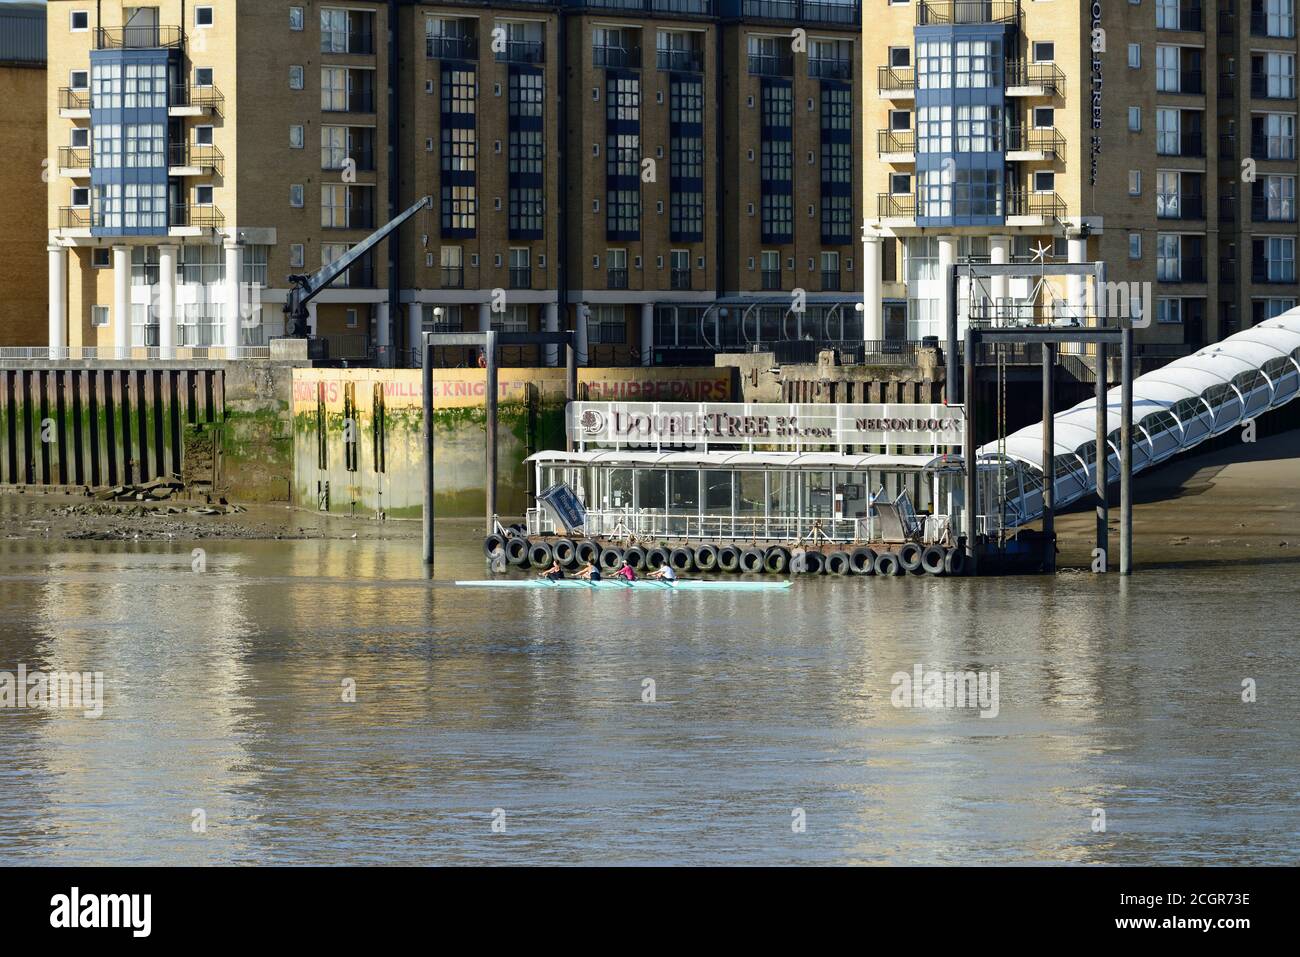 Coxless four rowing past Nelson Dock Pier and the Doubletree Hilton on the Thames at low tide, Canary Wharf, East London, United Kingdom Stock Photo